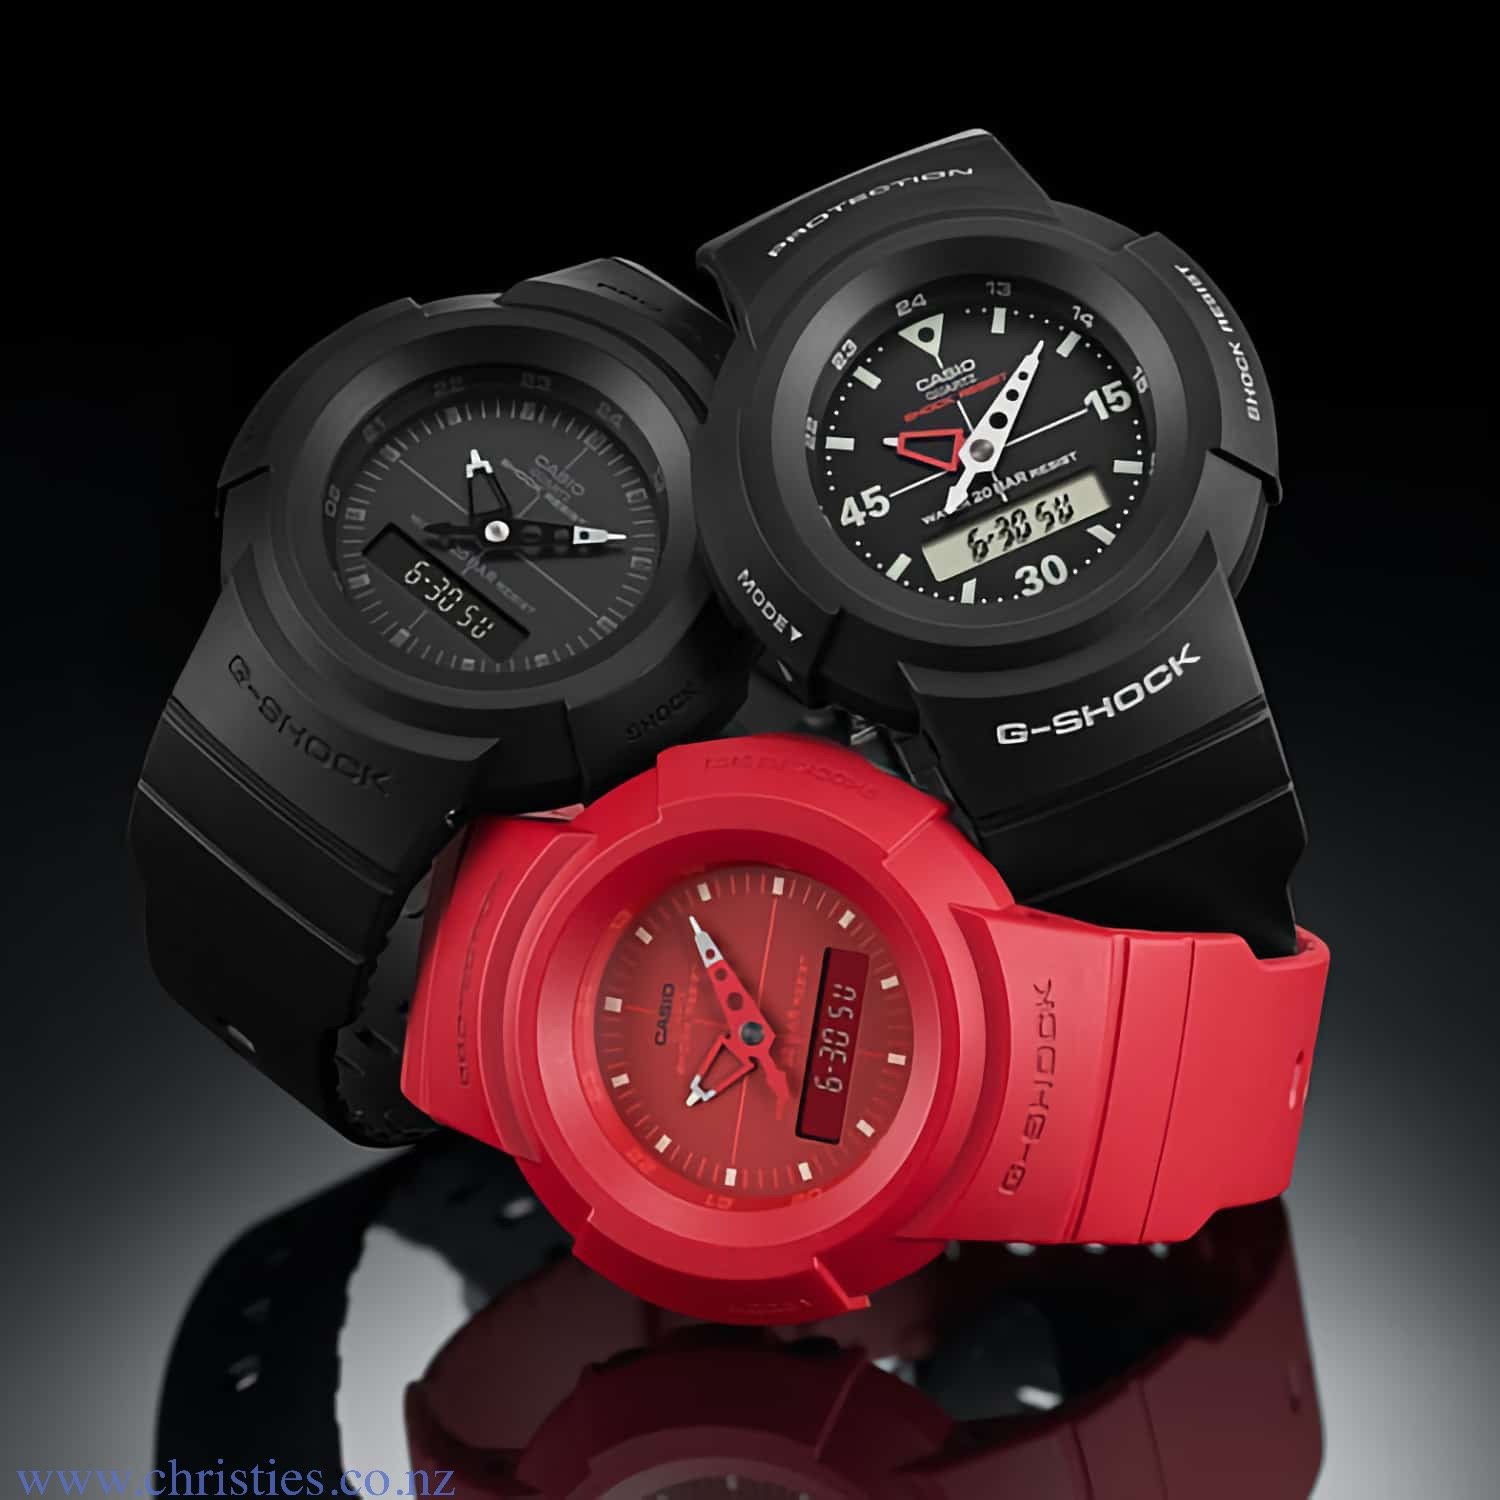 AW500E-1E G-Shock Analog Digital Watch. These new models revive the classic AW-500 Series with new looks that embody the unmatched toughness for which G-SHOCK has been renowned since its inception back in 1983. Making its initial appearance in 1989 as G-S